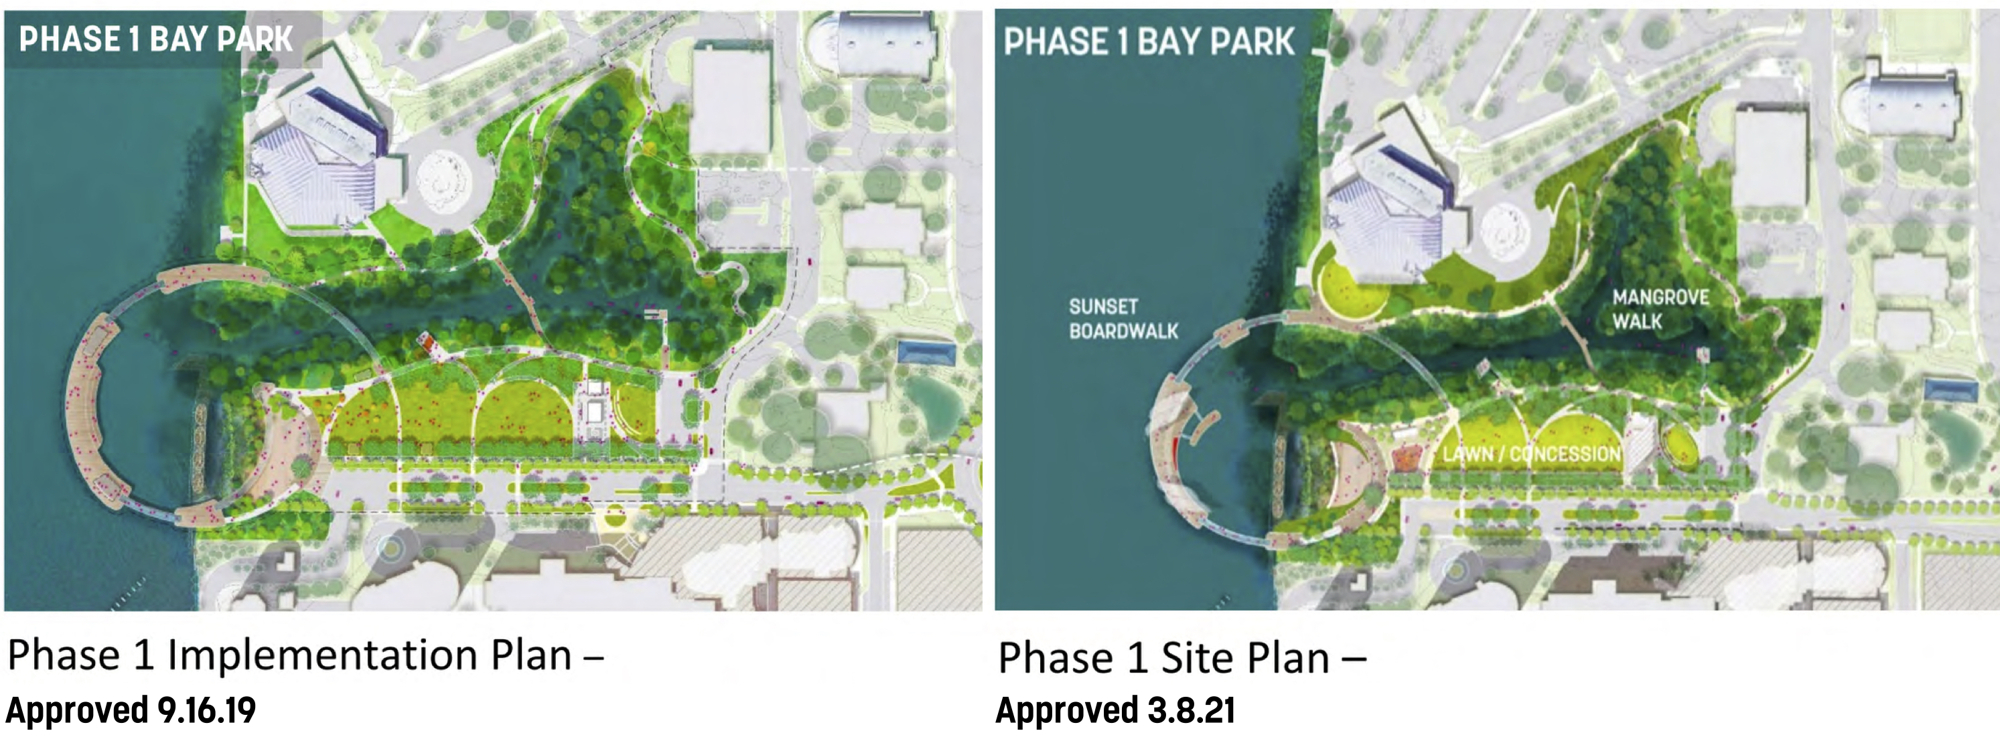 Despite minimal changes between the implementation plan and site plan stages, The Bay Park Conservancy said the extra layer of review was time consuming and costly. Image via city of Sarasota